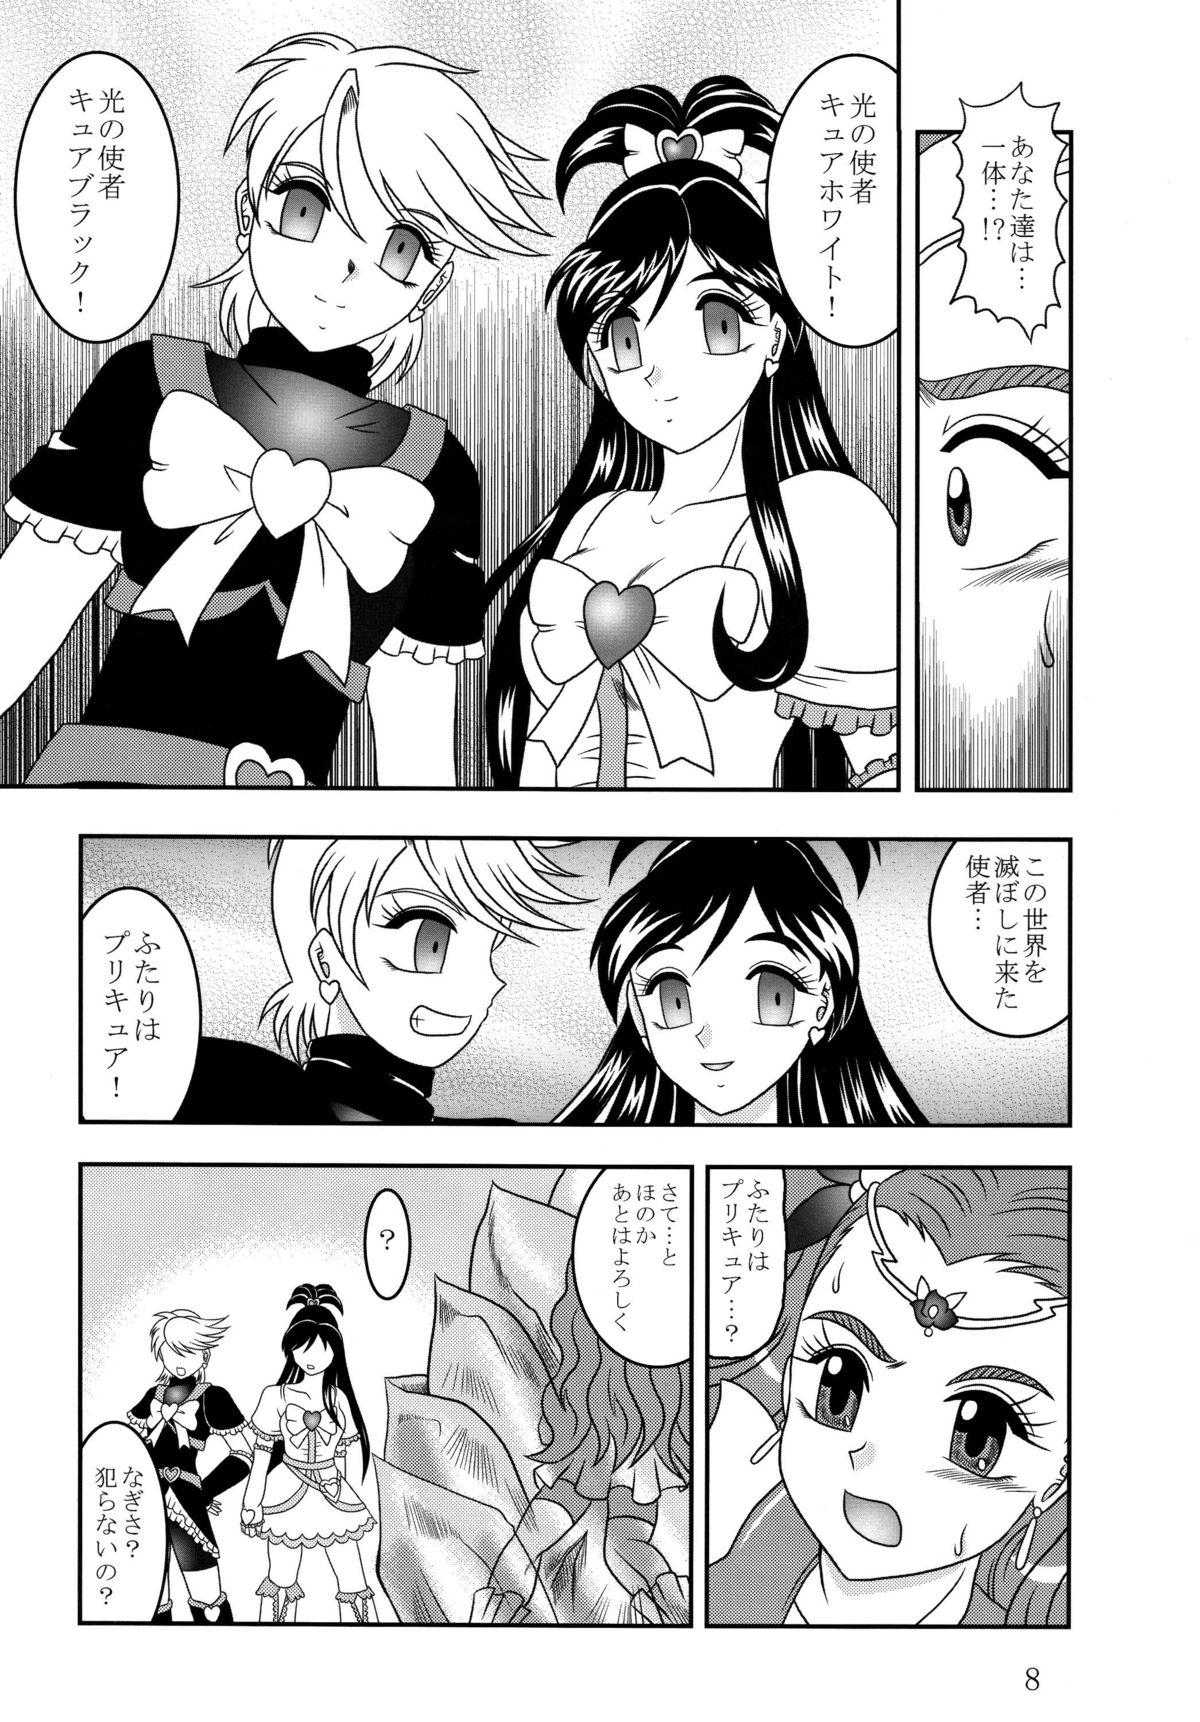 Cum Swallowing GREATEST ECLIPSE Frozen Rose - Pretty cure Yes precure 5 Slapping - Page 8